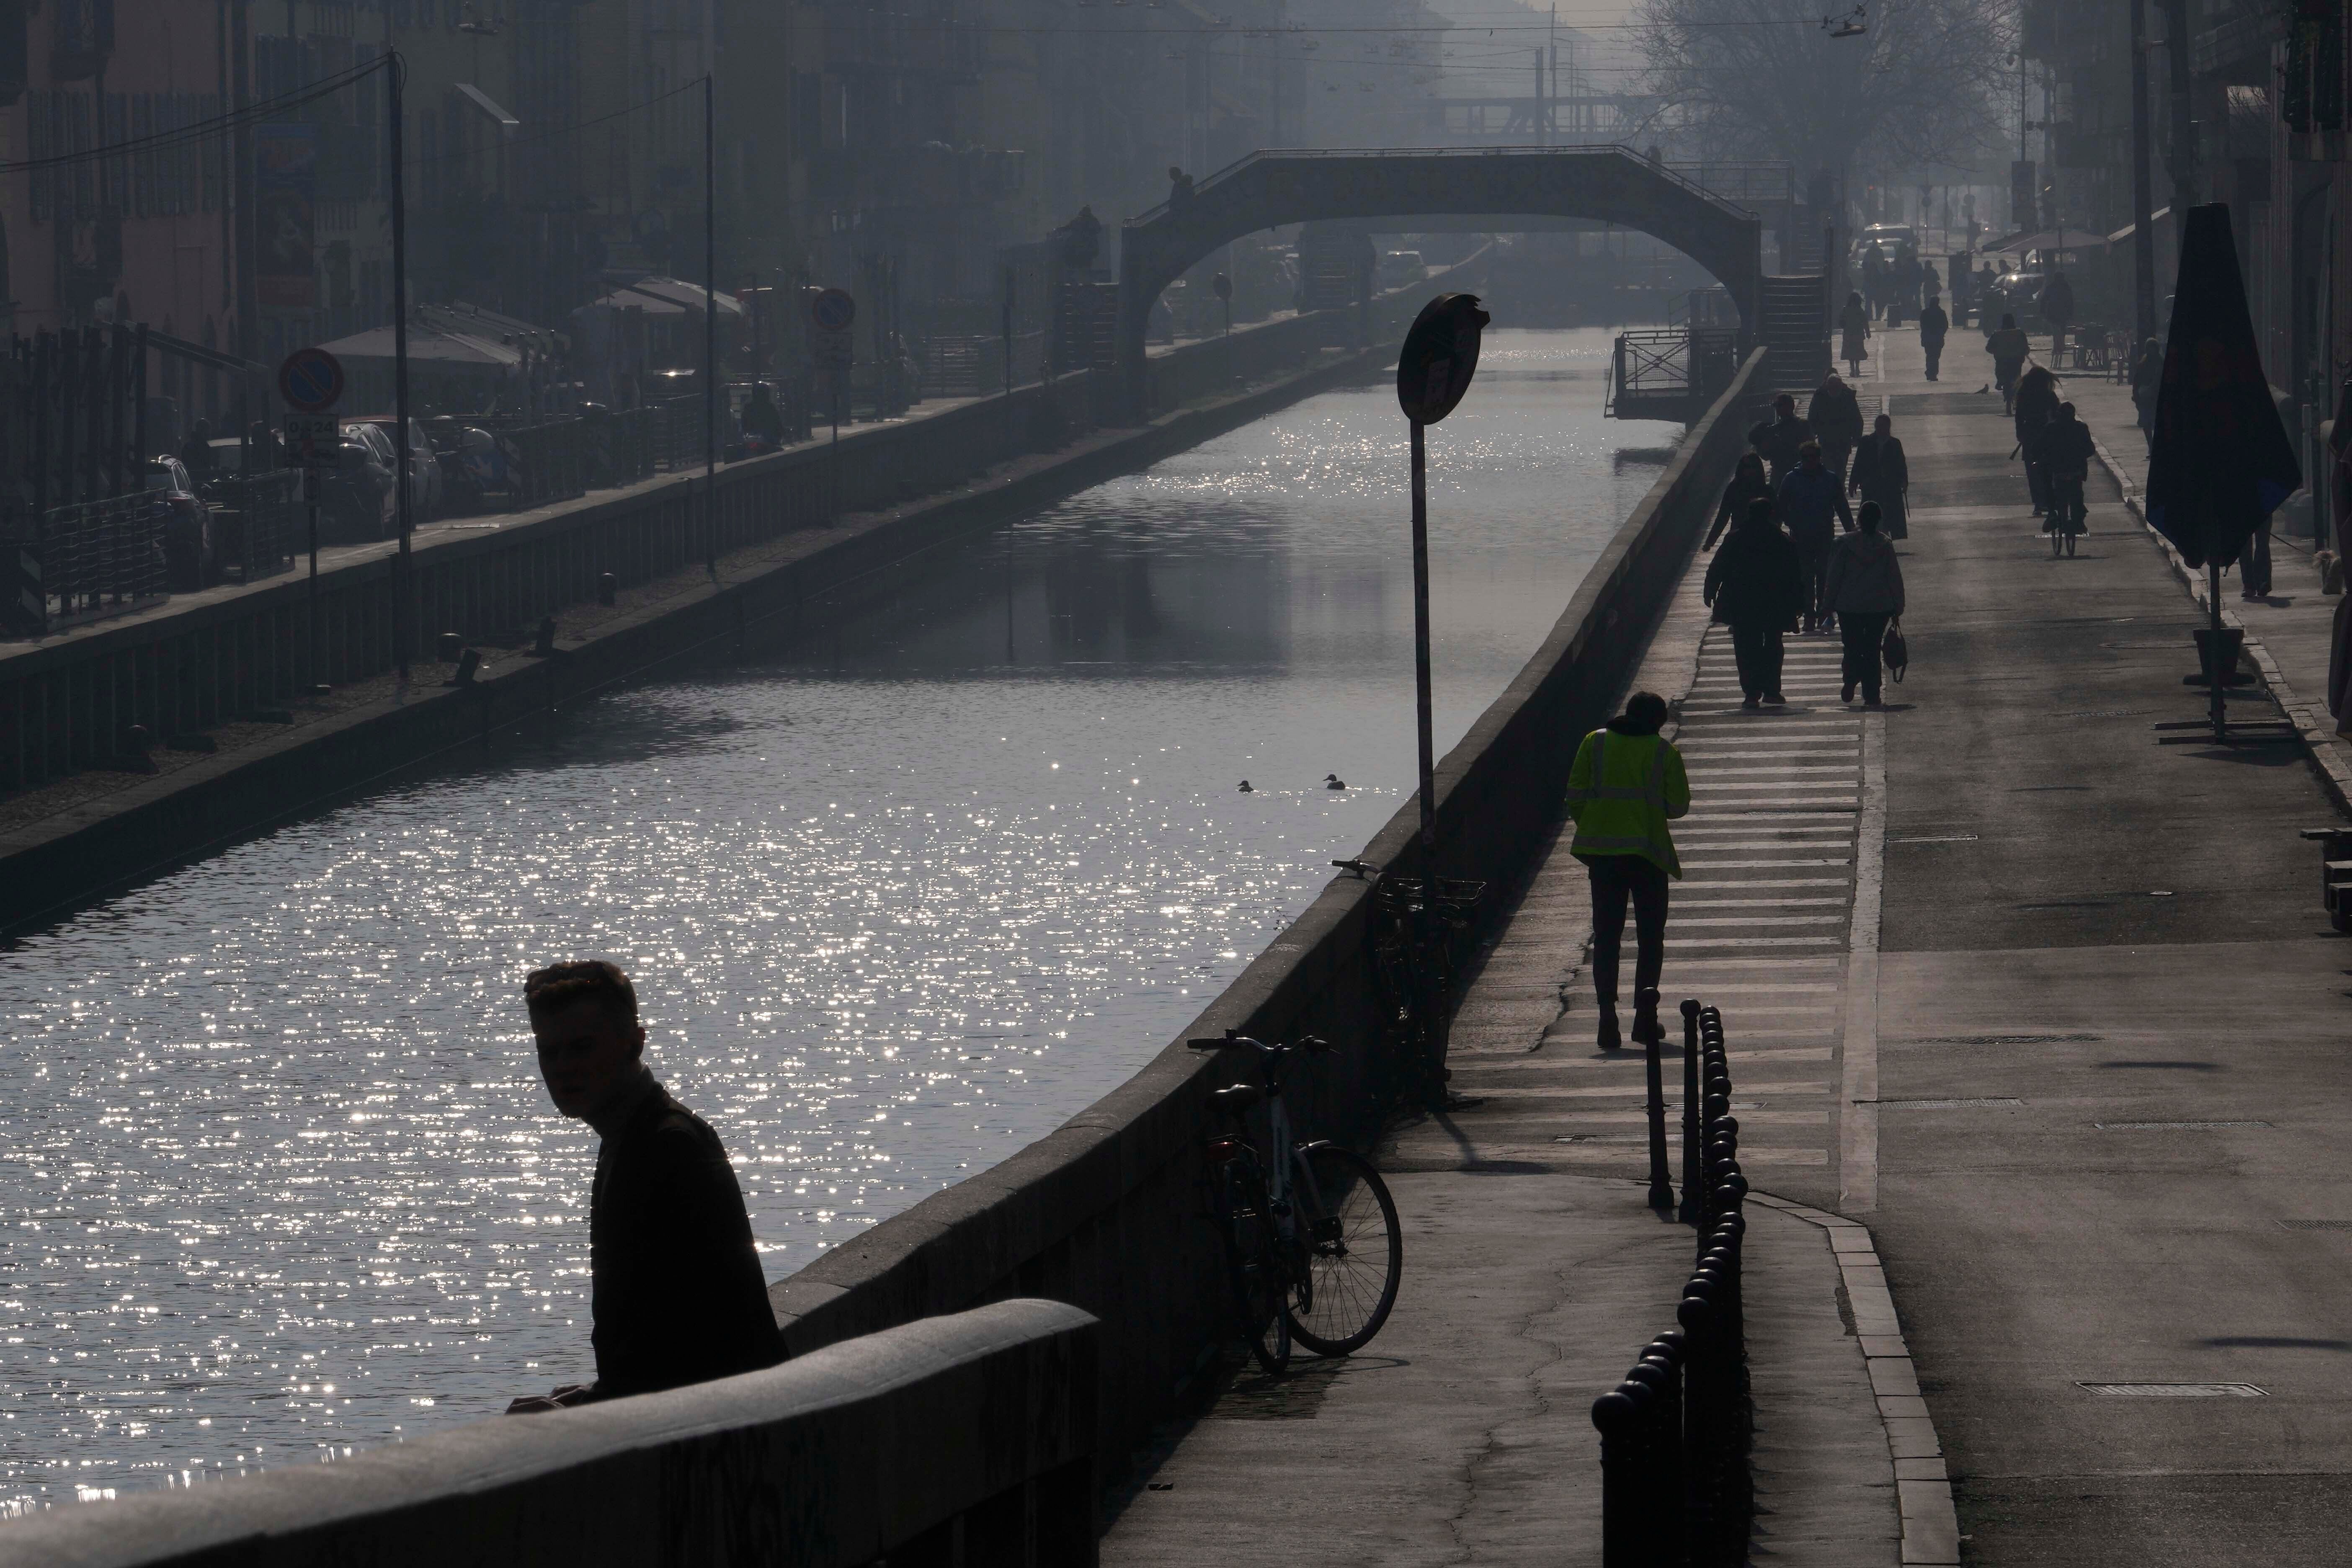 People walk along a shrouded in mist and smog Naviglio Pavese canal, in Milan